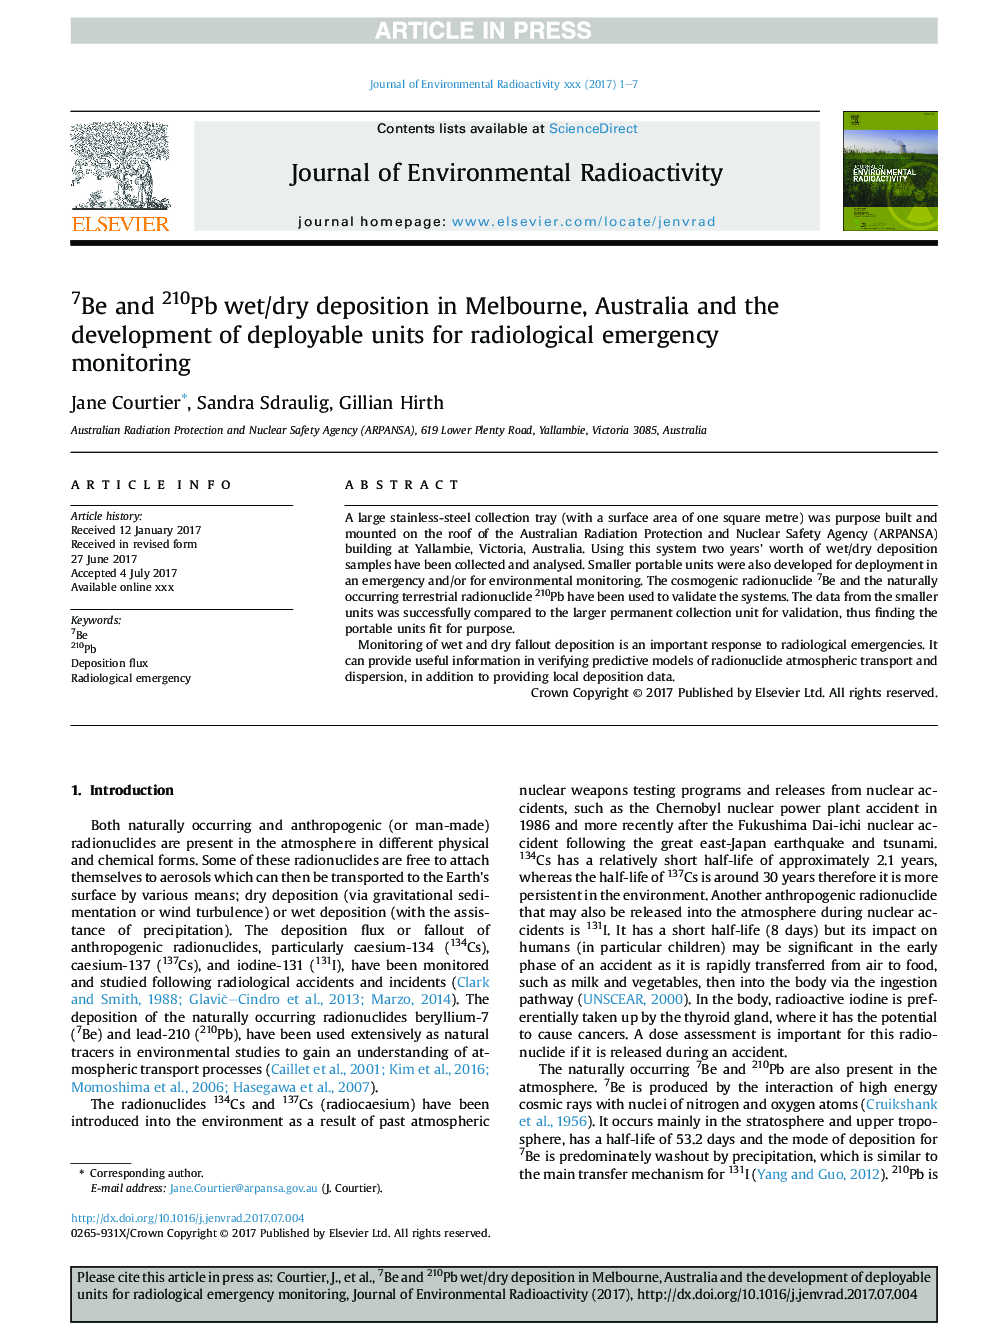 7Be and 210Pb wet/dry deposition in Melbourne, Australia and the development of deployable units for radiological emergency monitoring